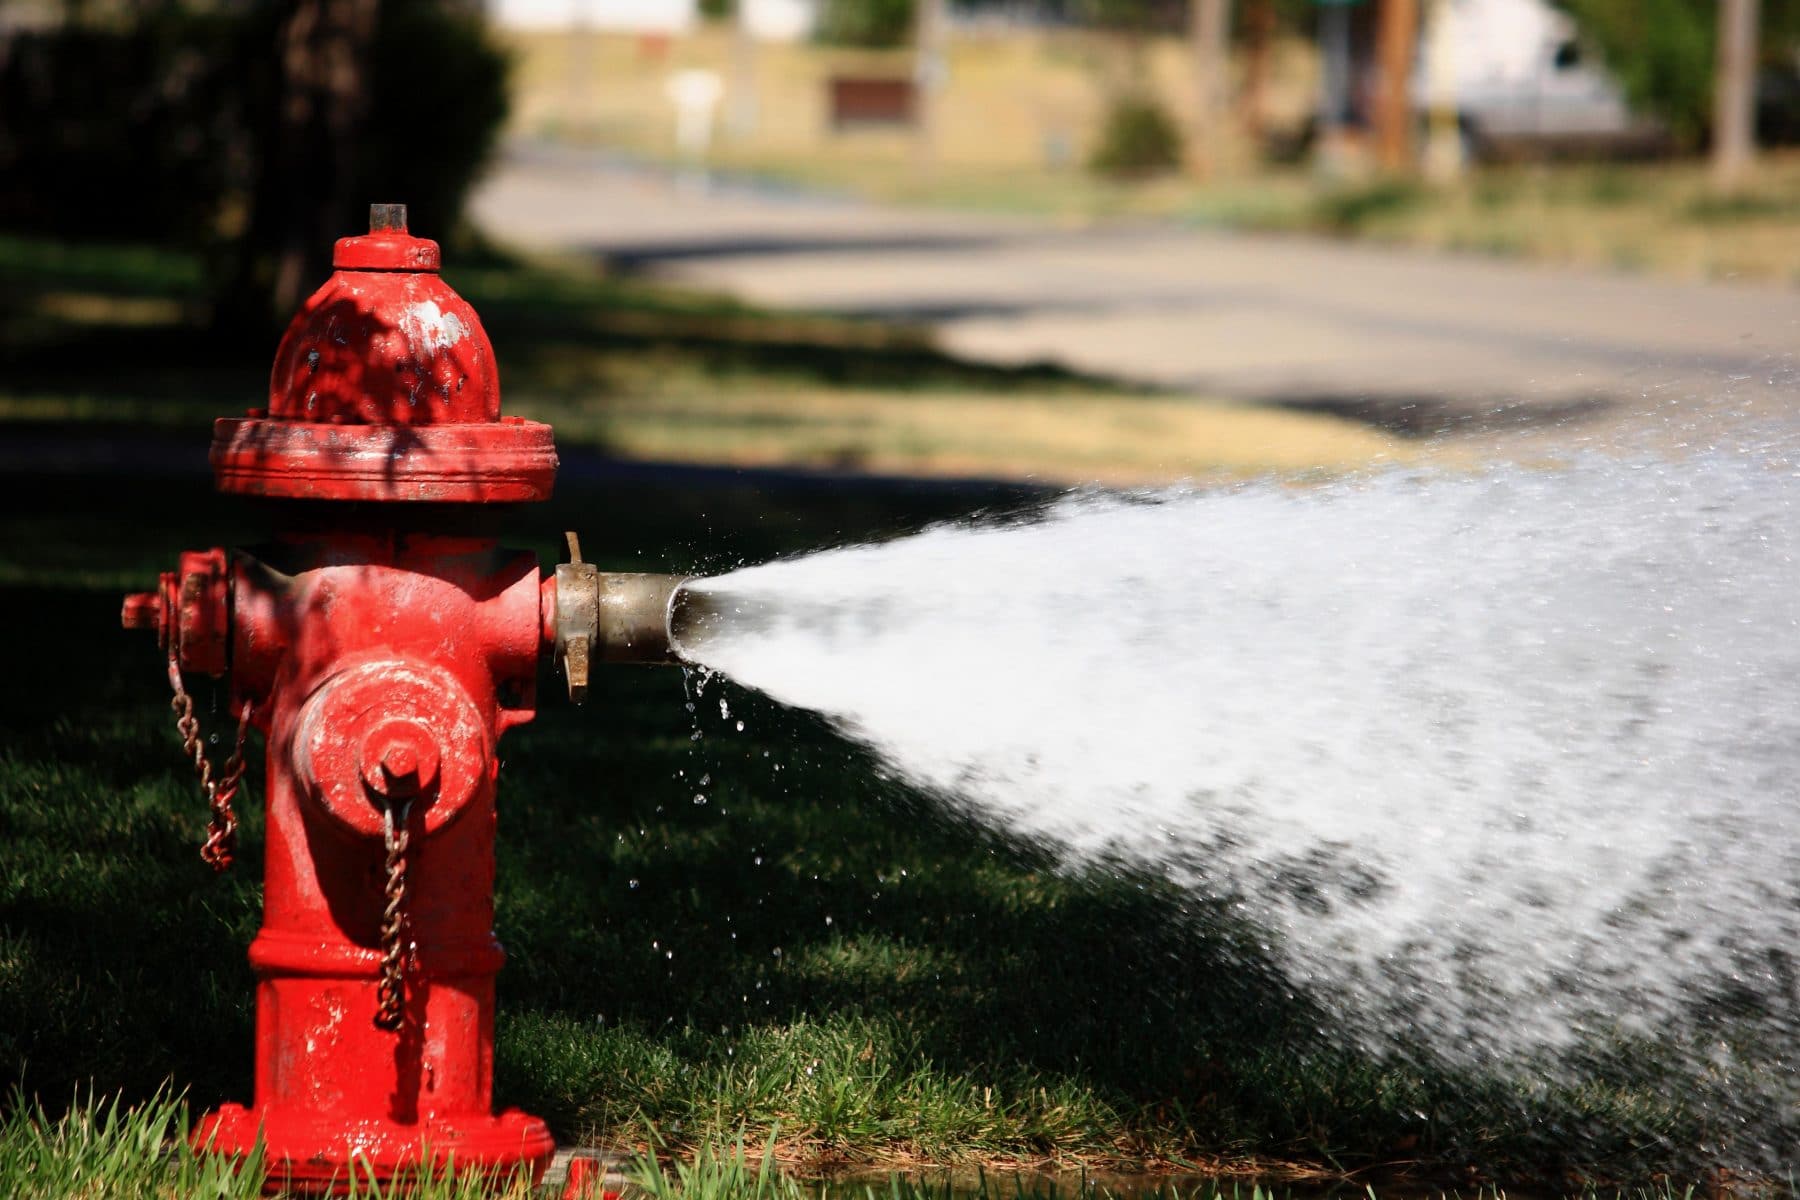 Fire department to begin flushing, testing fire hydrants